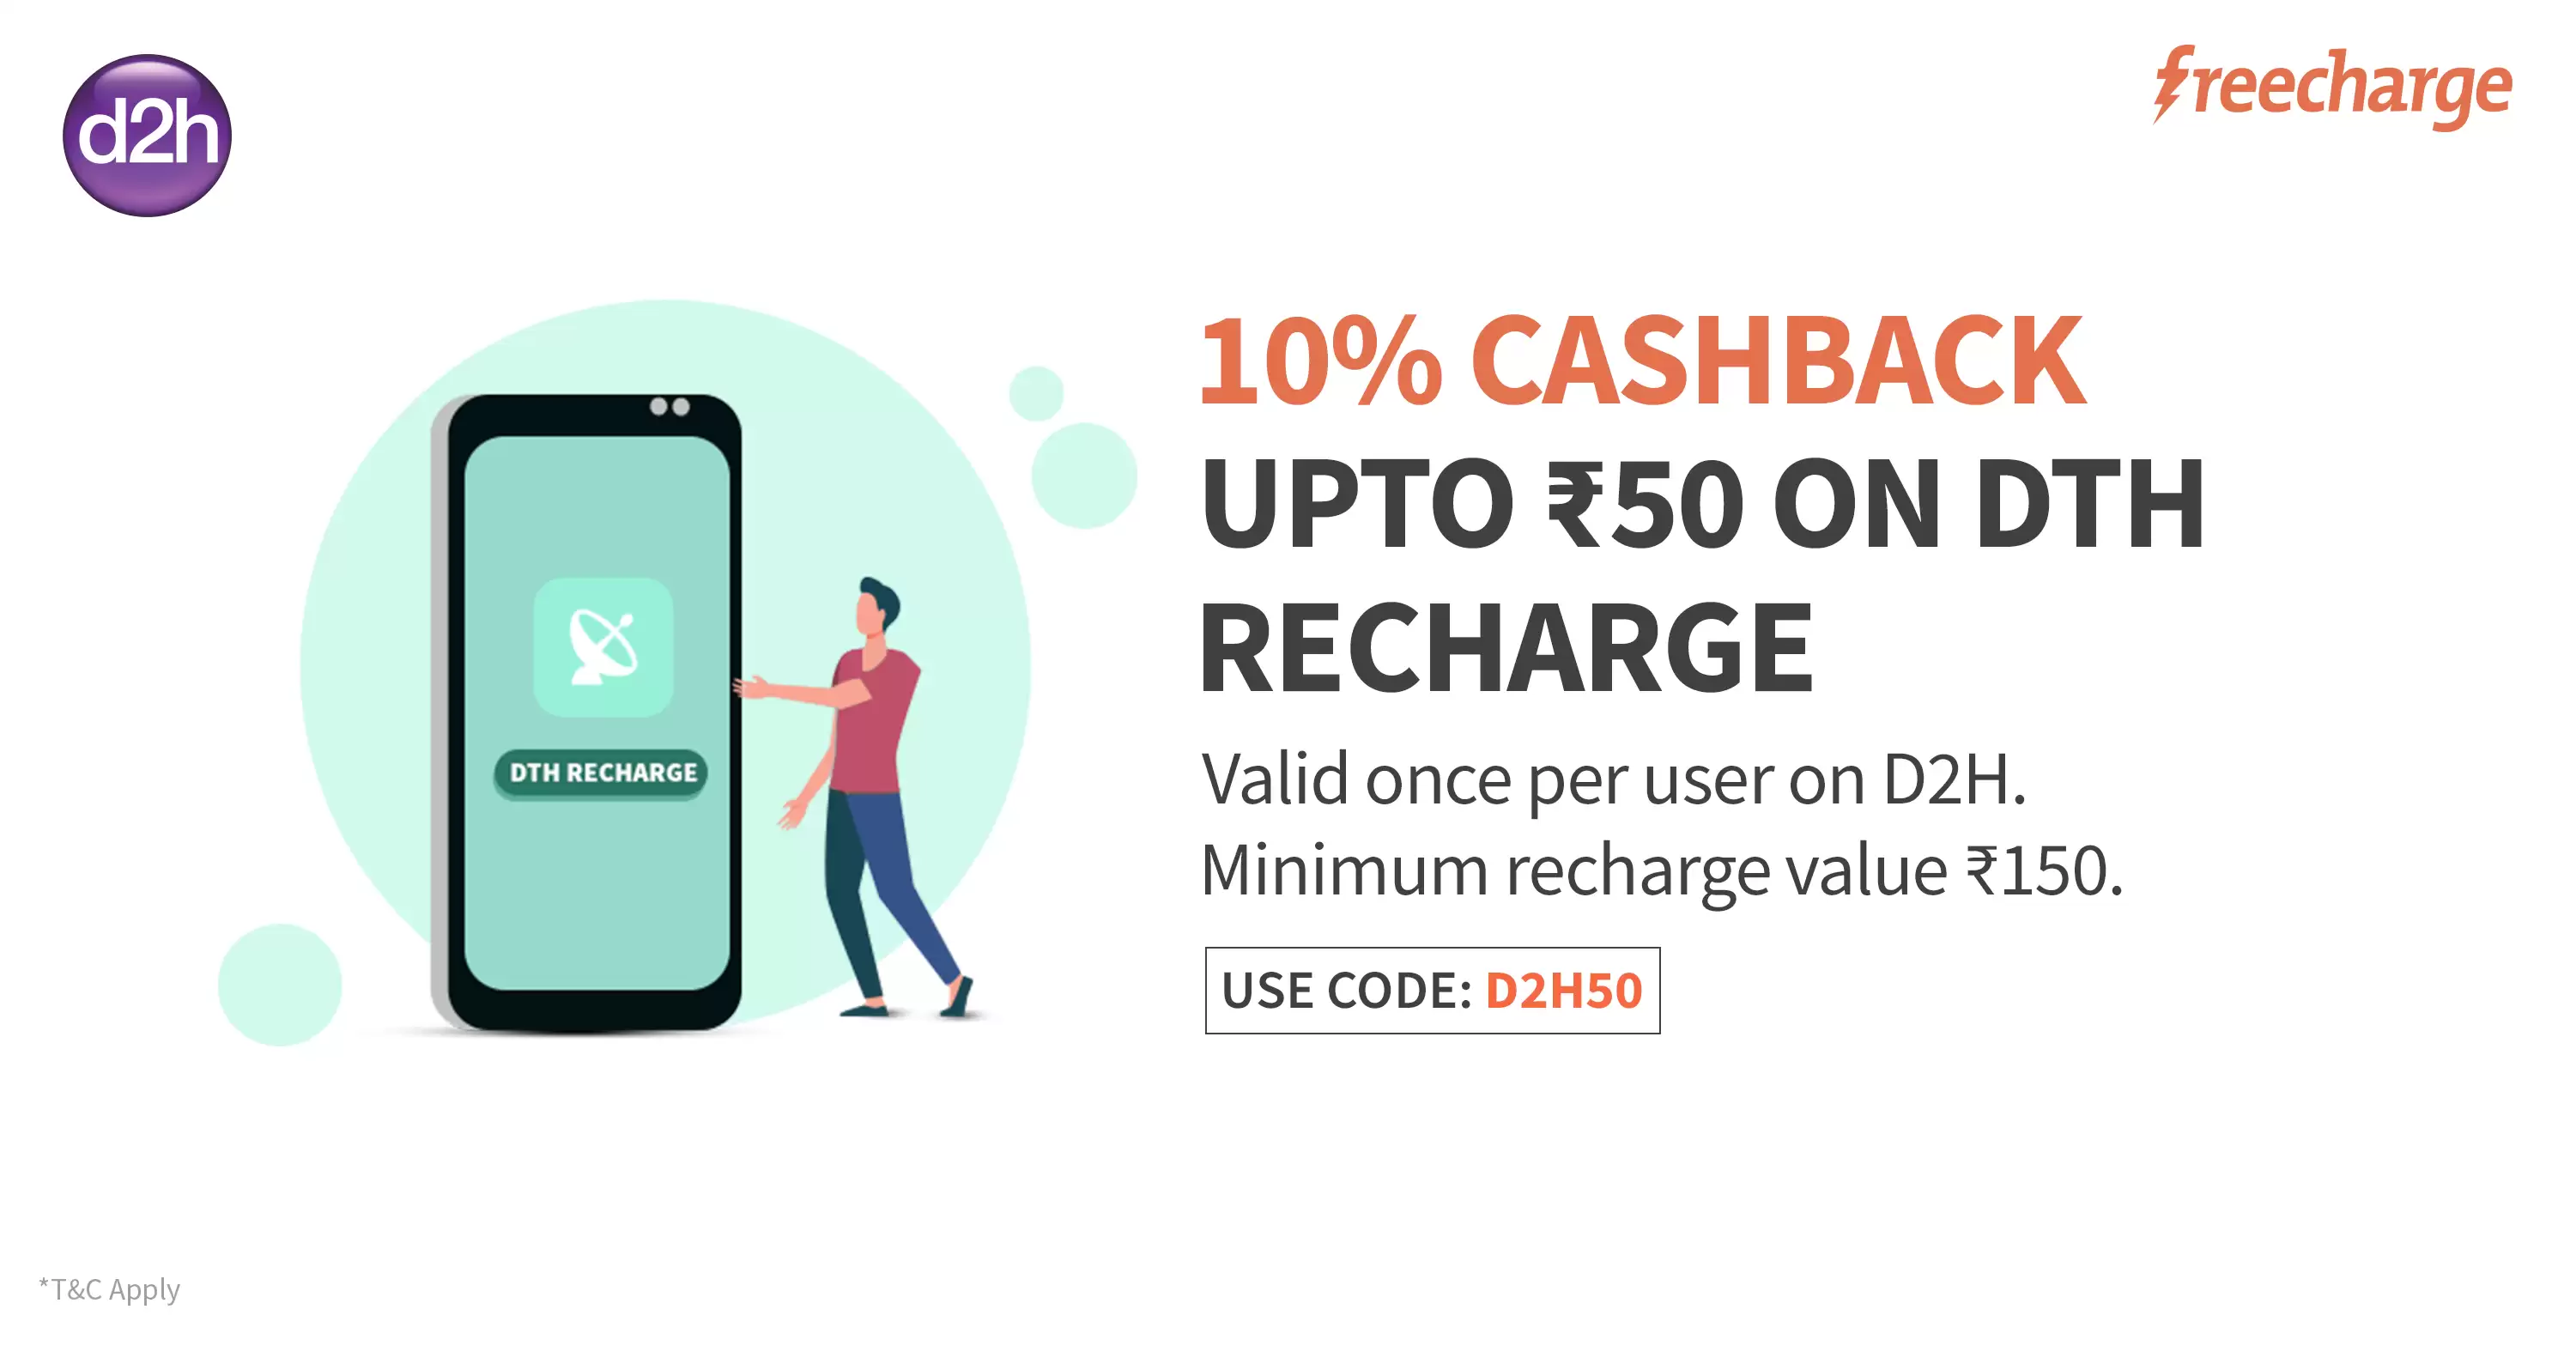 Get 10% Upto Rs.50 Cashback On Minimum D2H Transaction Of Rs.150 At Freecharge